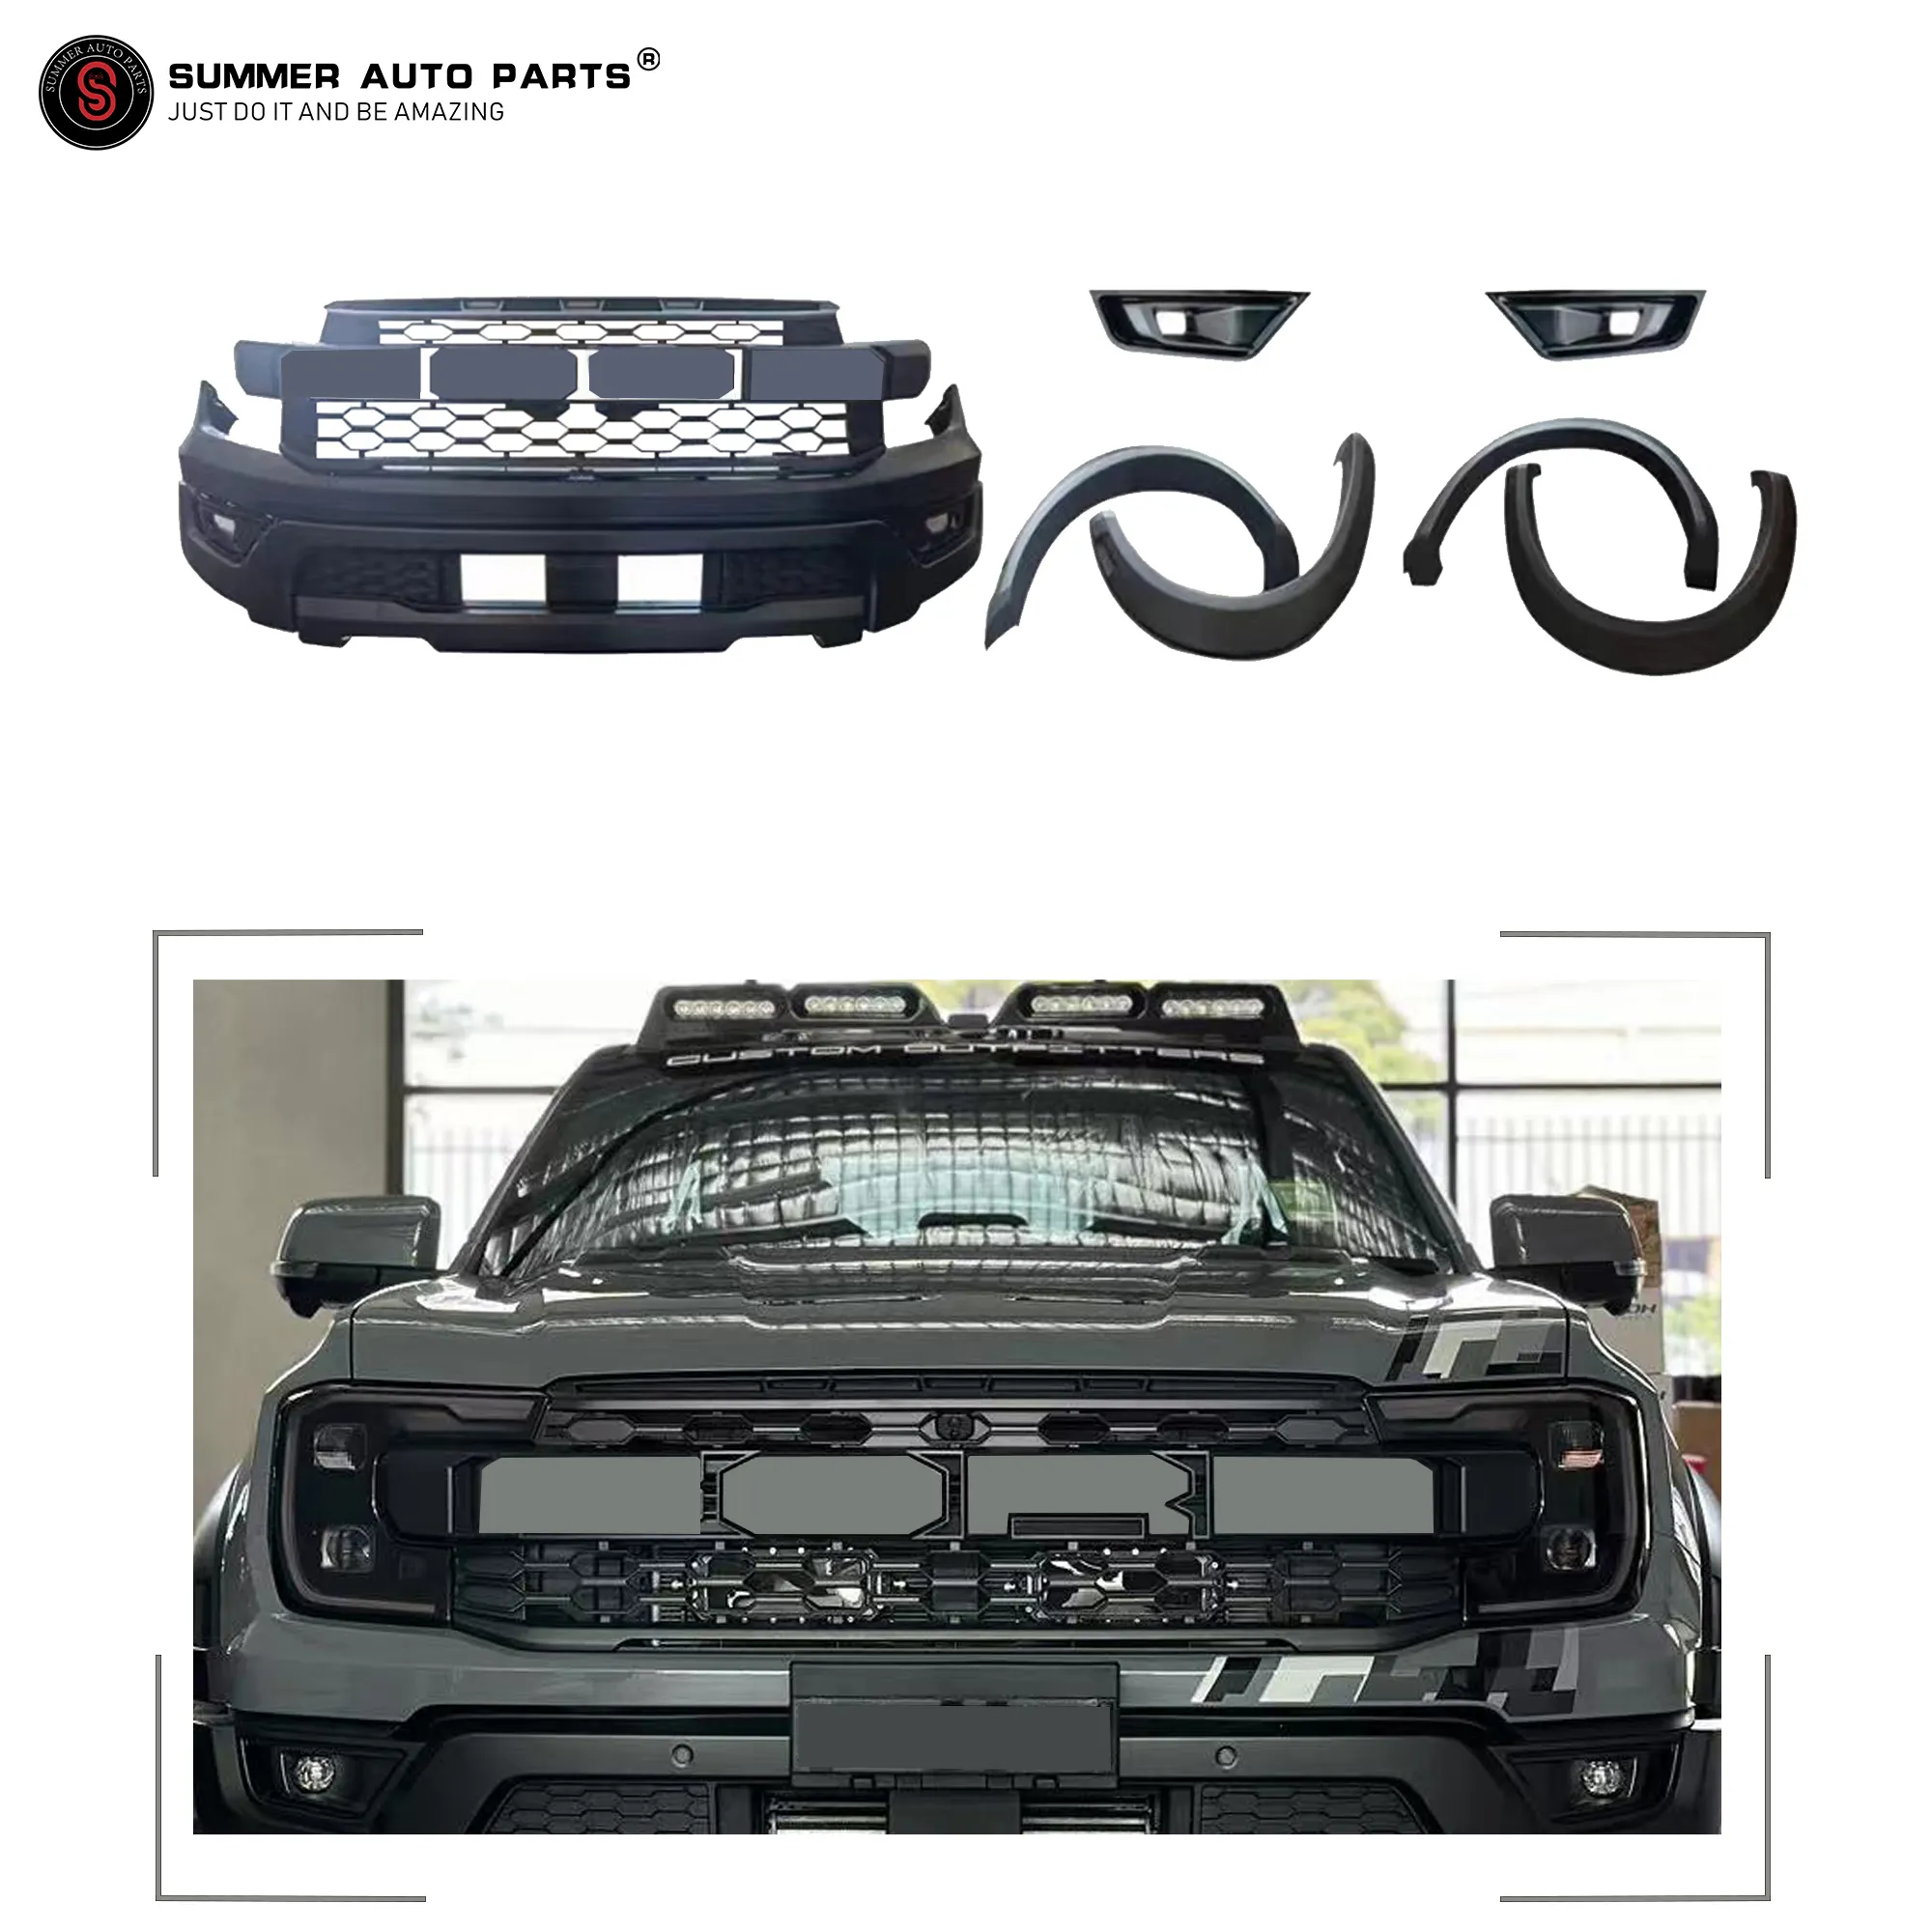 Vehicle Parts Car Accessories Modified Grill Ranger Led Car Front Grille Bull Bar For Ford Ranger Body Kit Upgrade